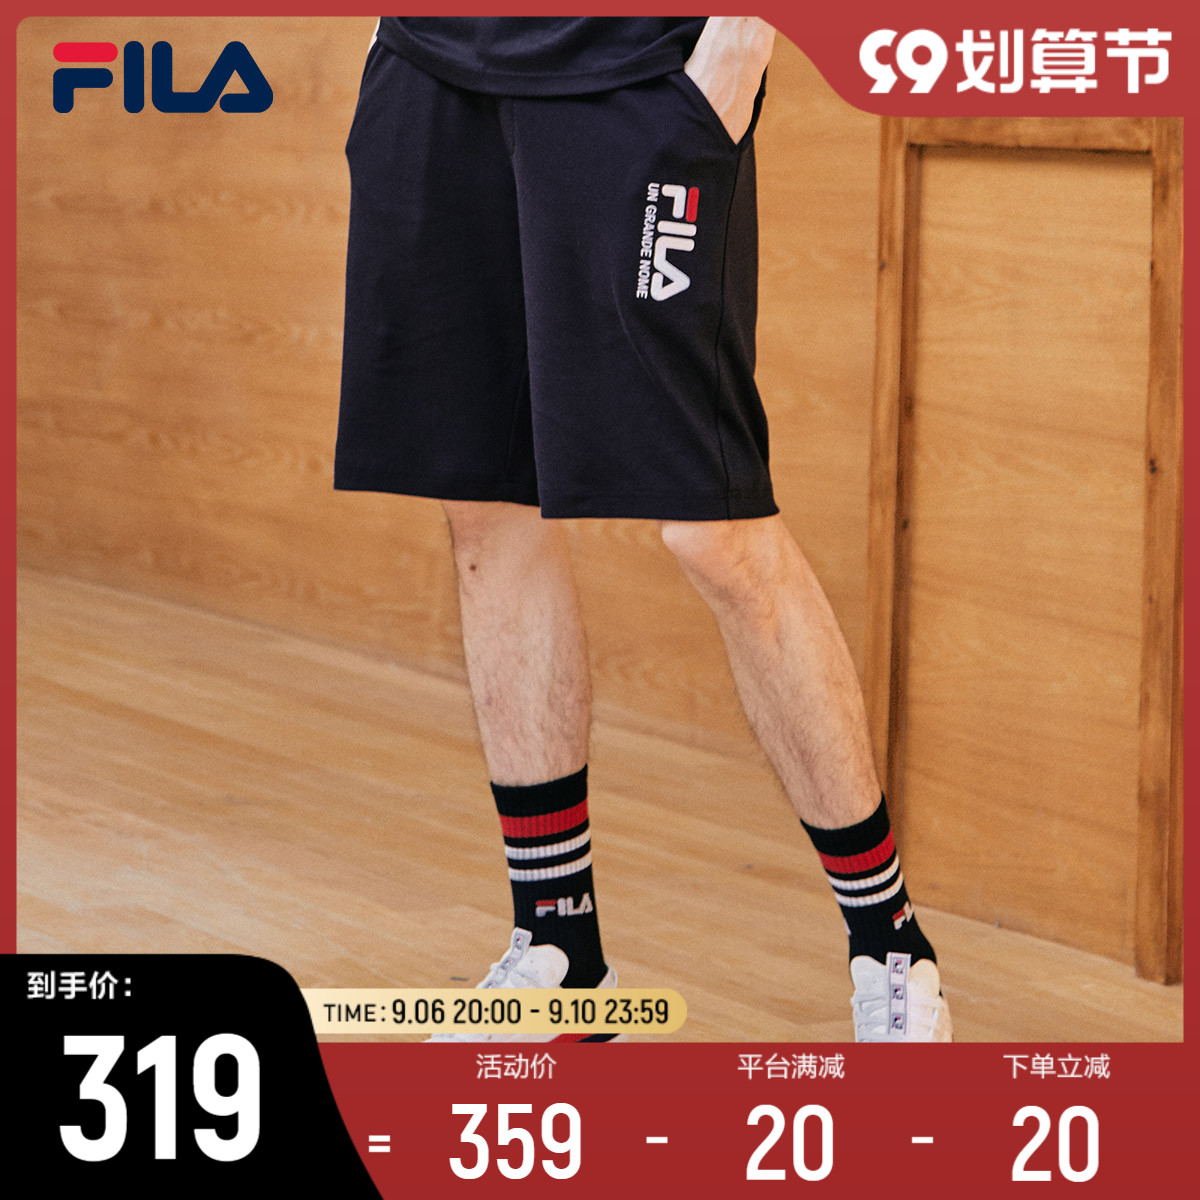 FILAFila five-point pants men's 2022 summer new sports casual knitted men's loose shorts tide running pants